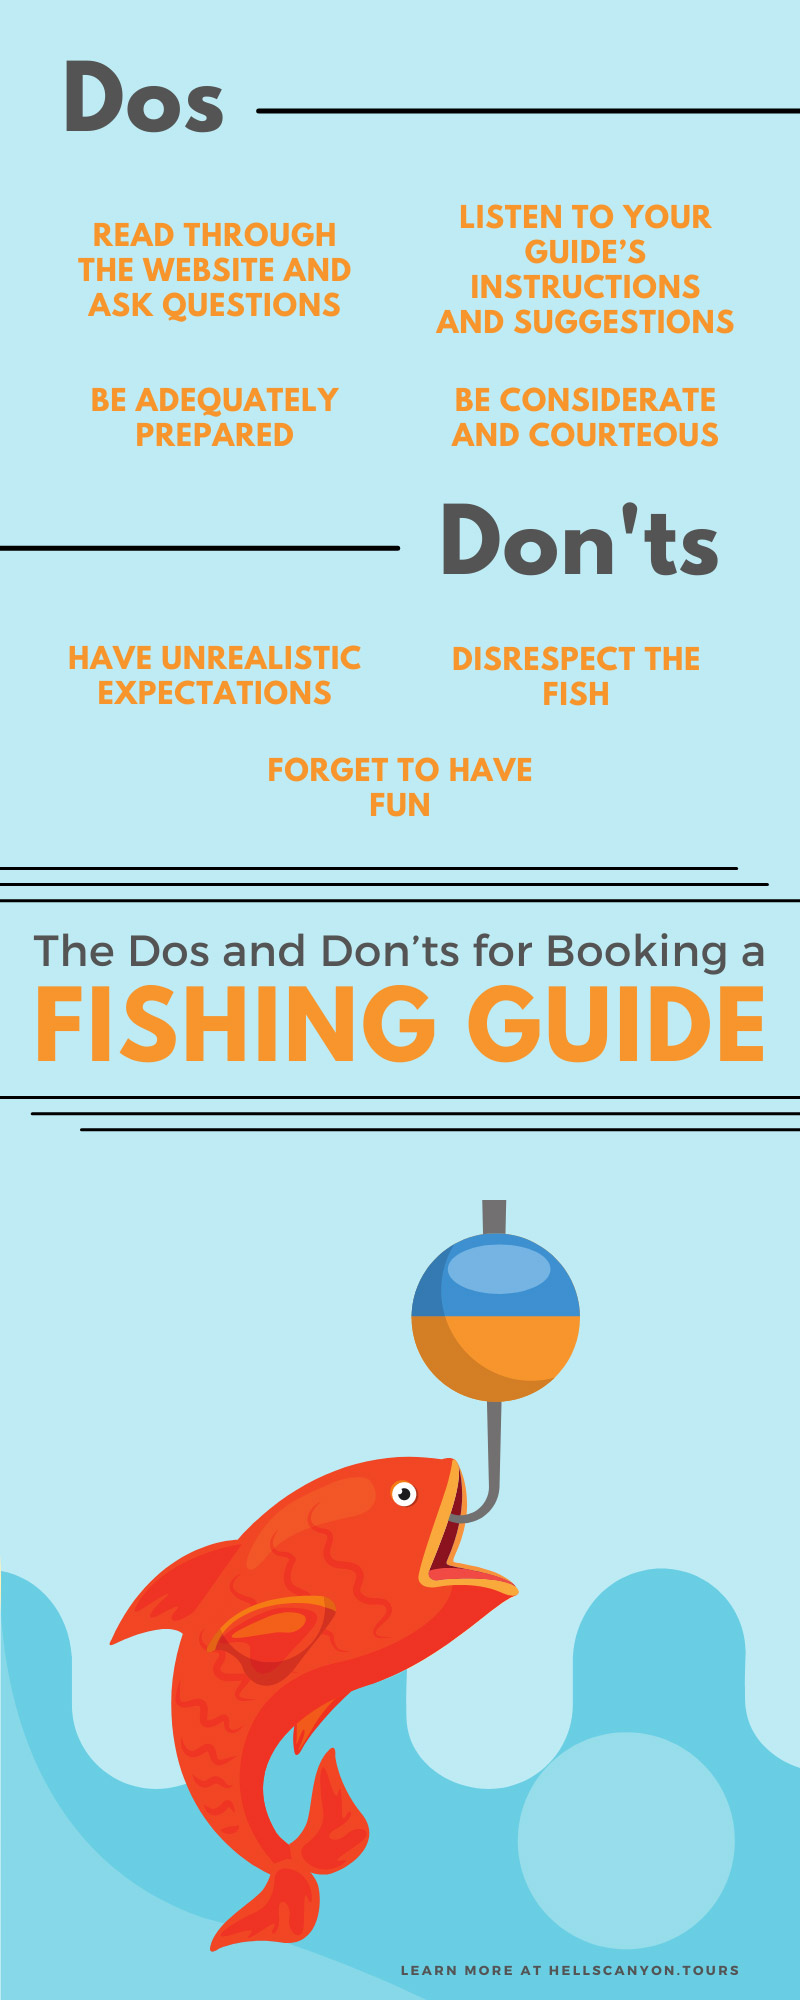 The Dos and Don’ts for Booking a Fishing Guide